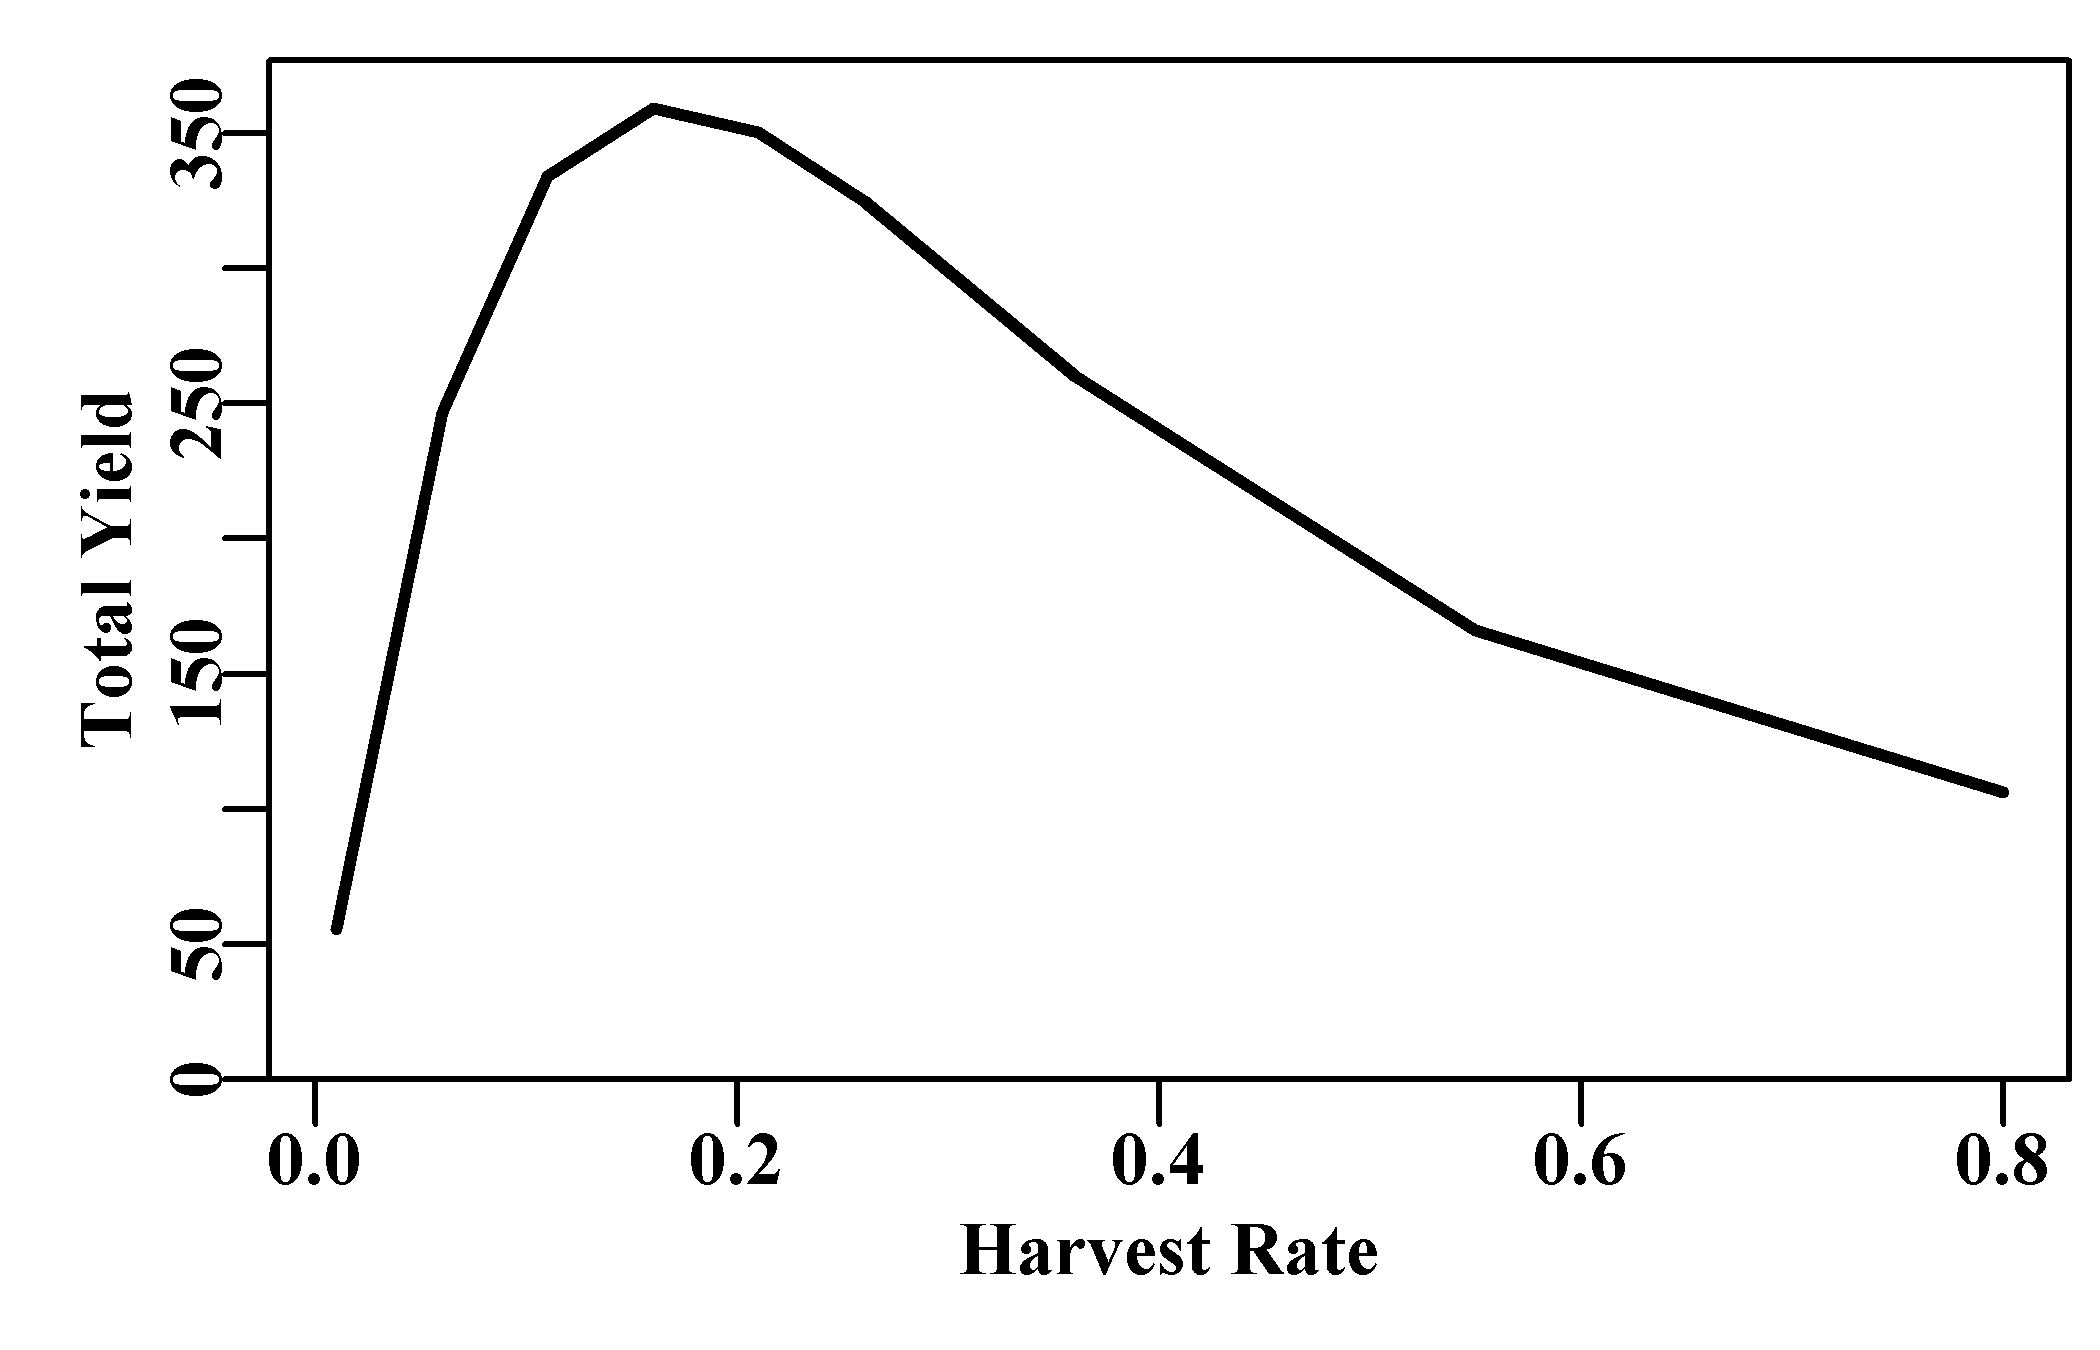 A simplified yield-per-recruit analysis that ignores natural mortality, selectivity-at-age, or any other influences. This analysis uses some weight-at-age data from Russell, 1942 although a wider array of harvest rates were examined than just the two by Russell.